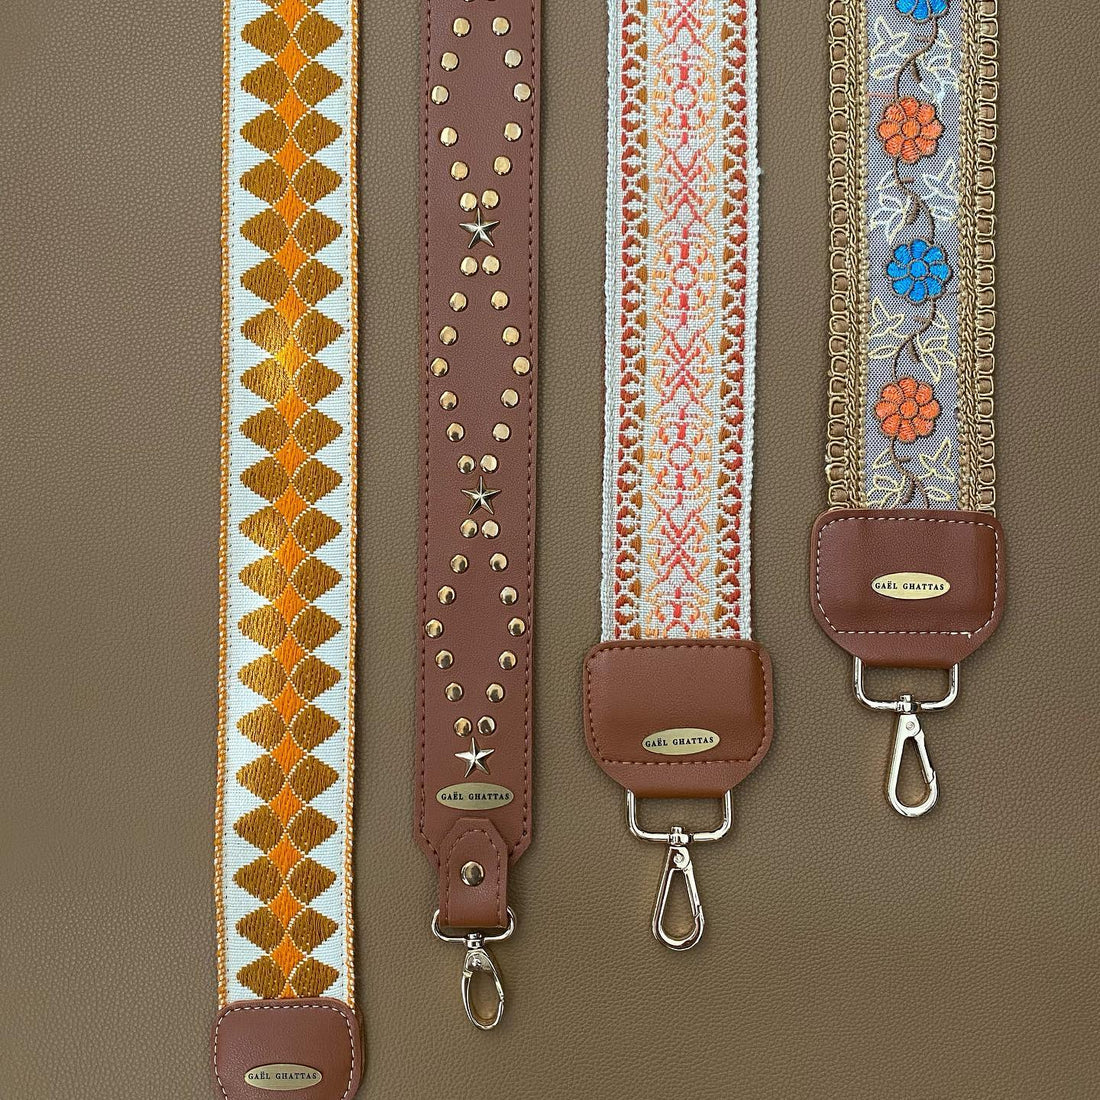 Different Kind of Straps